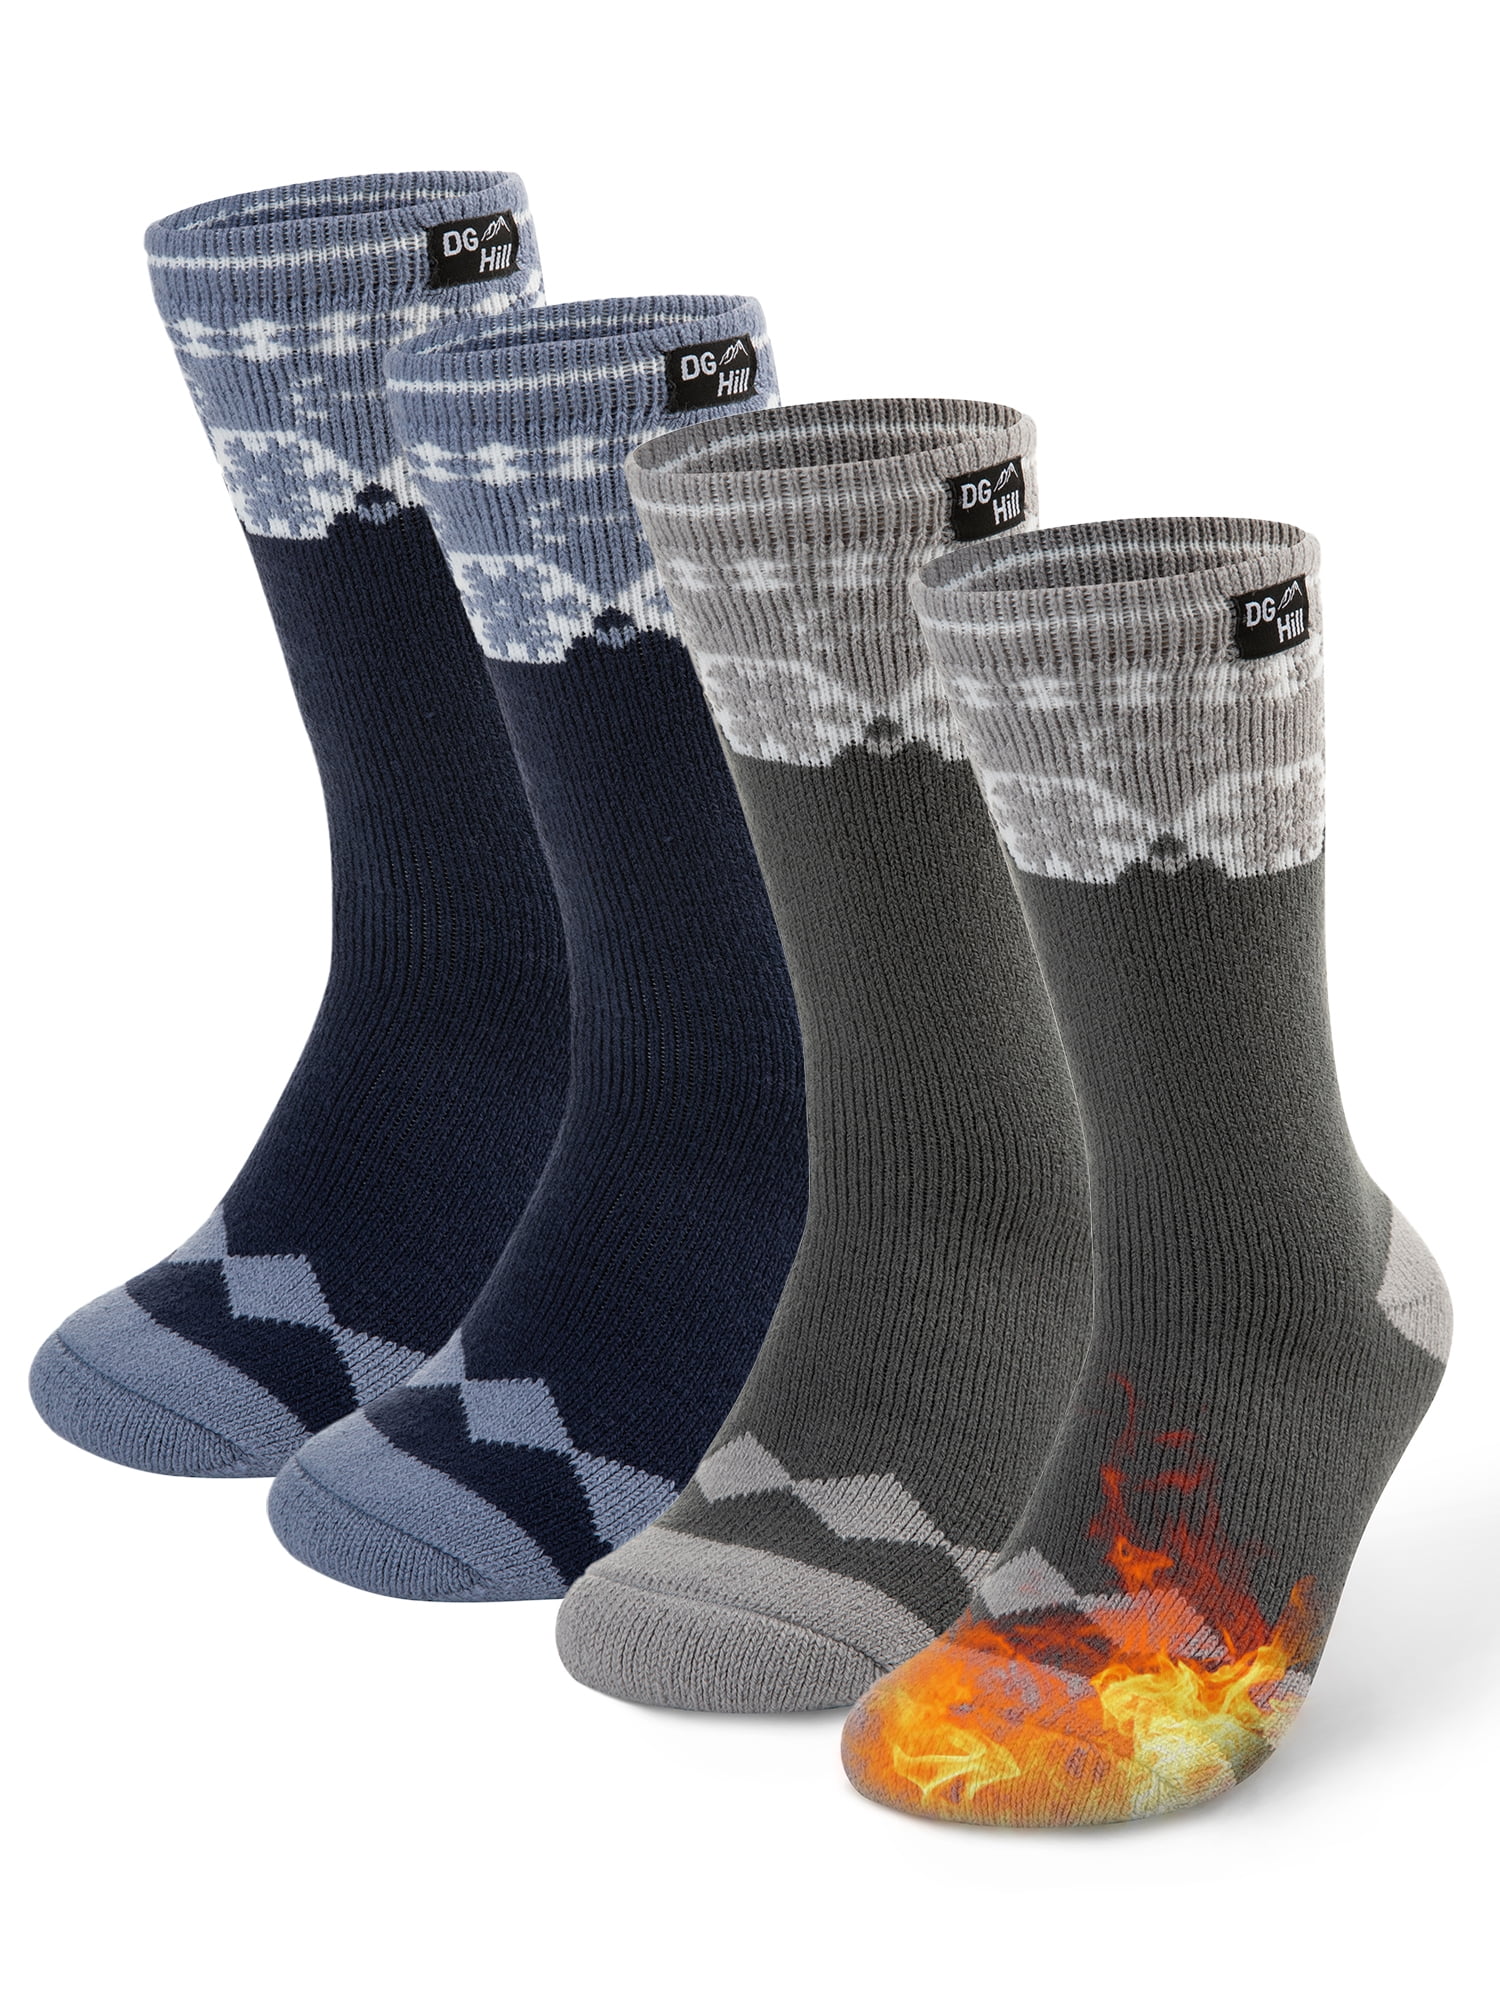 DG Hill Thermal Socks For Men, Heat Trapping Thick Thermal Insulated Winter Crew Socks, 2 Pack - image 1 of 9